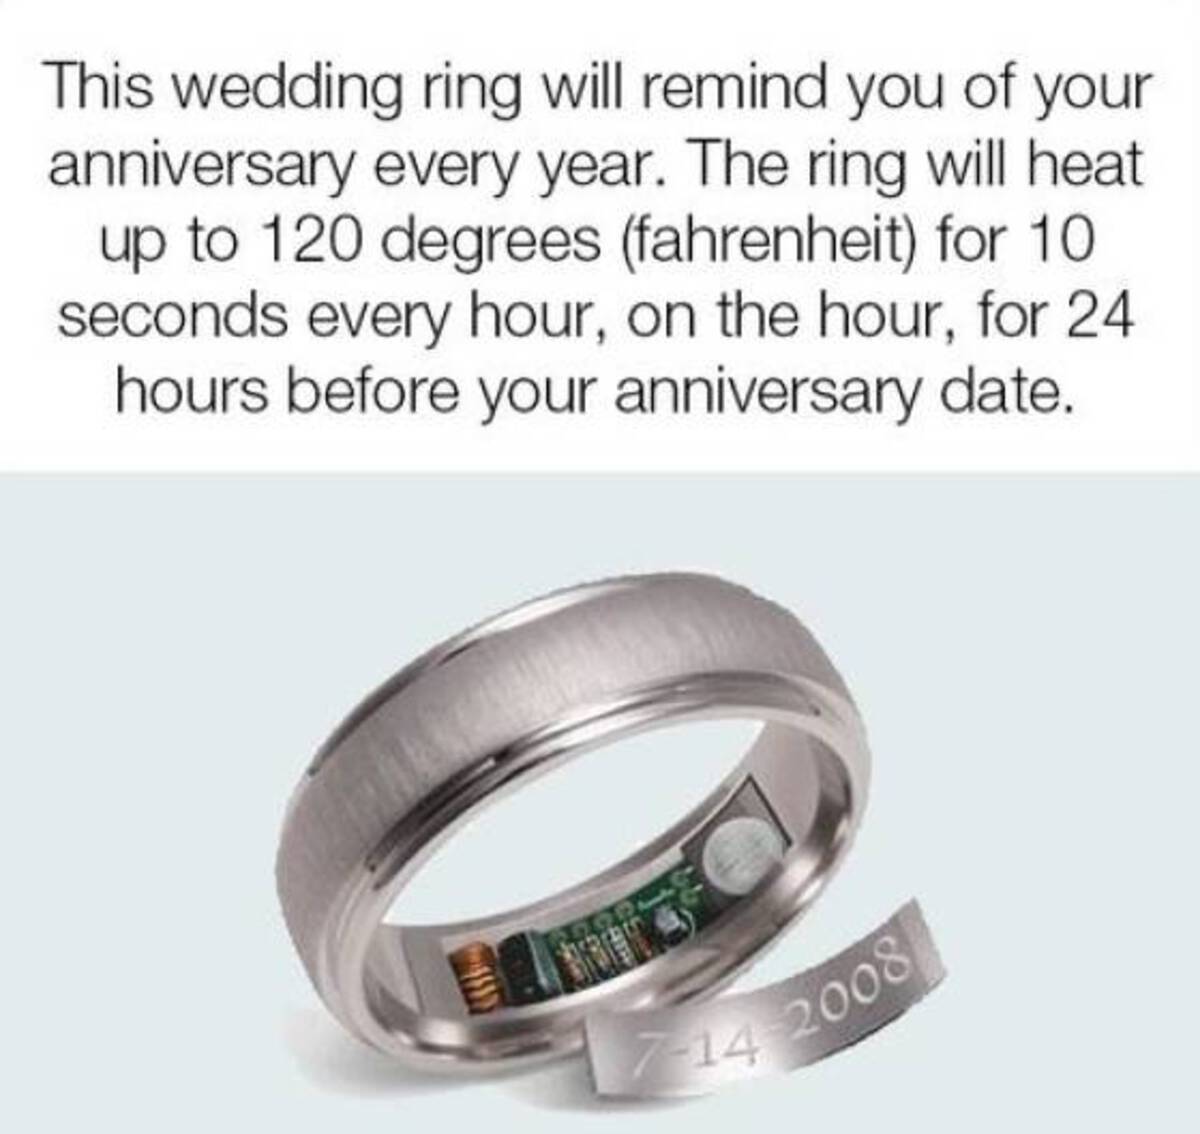 ring - This wedding ring will remind you of your anniversary every year. The ring will heat up to 120 degrees fahrenheit for 10 seconds every hour, on the hour, for 24 hours before your anniversary date. 7142008